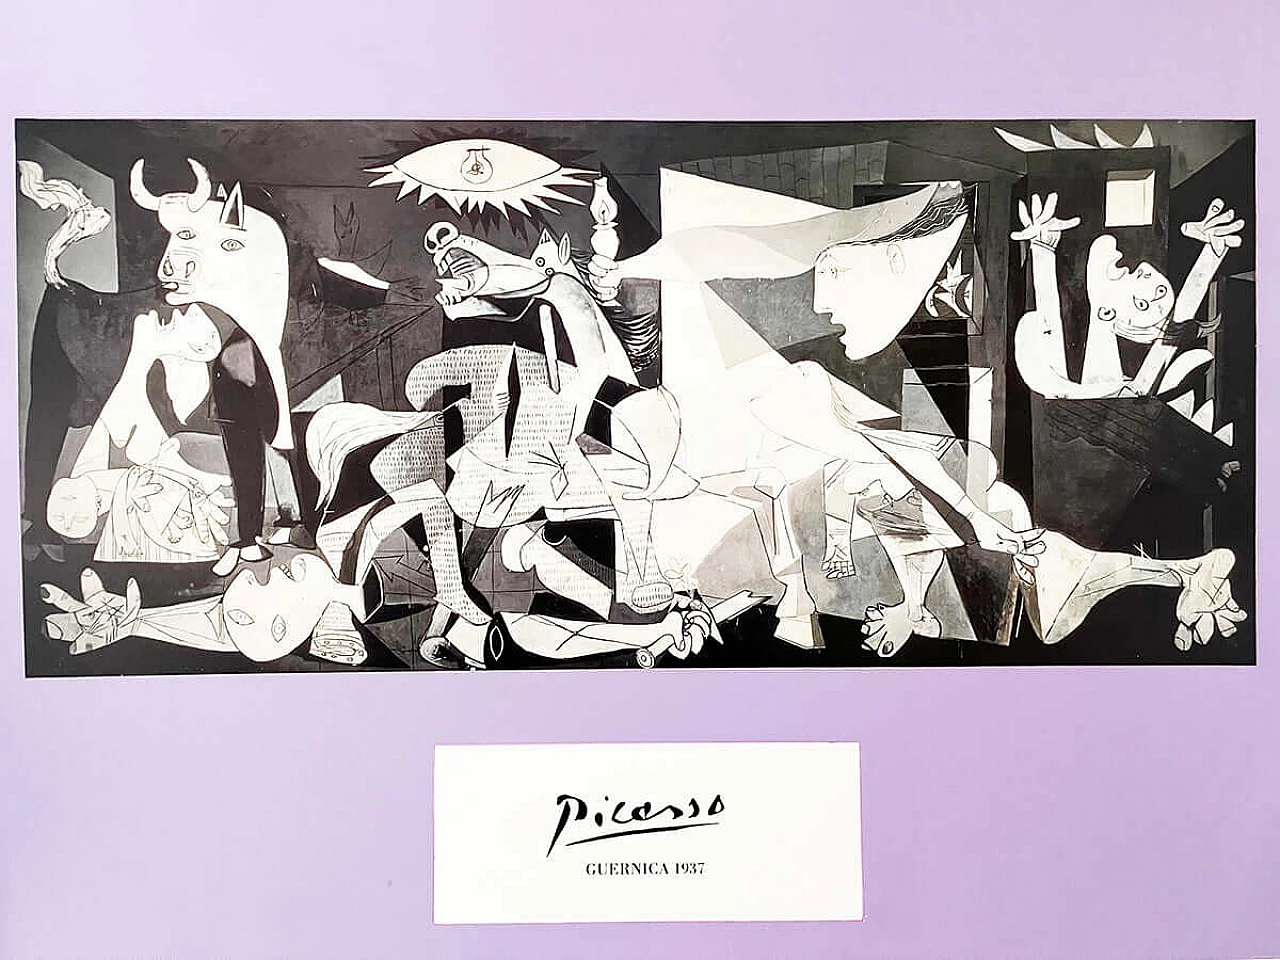 Poster of Guernica by Pablo Picasso, 1937 2